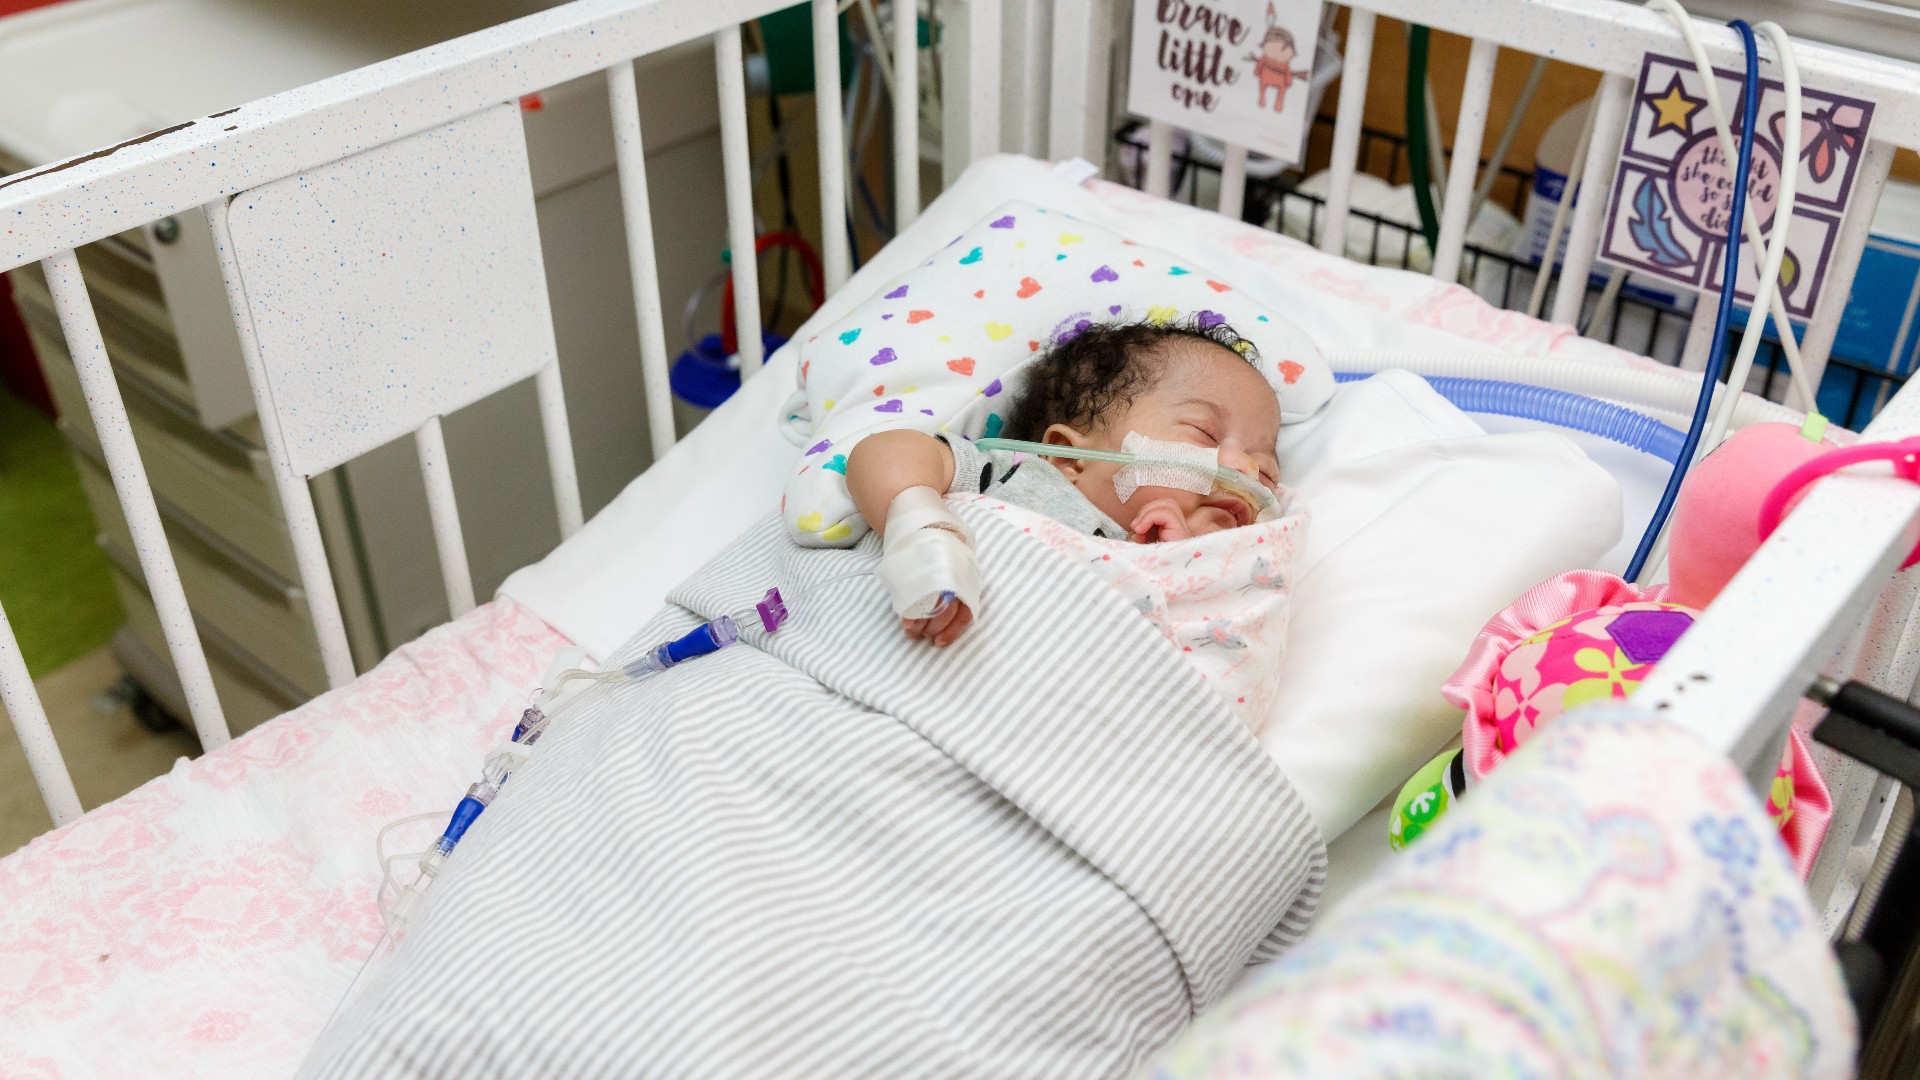 Young baby sleeping in NICU bed